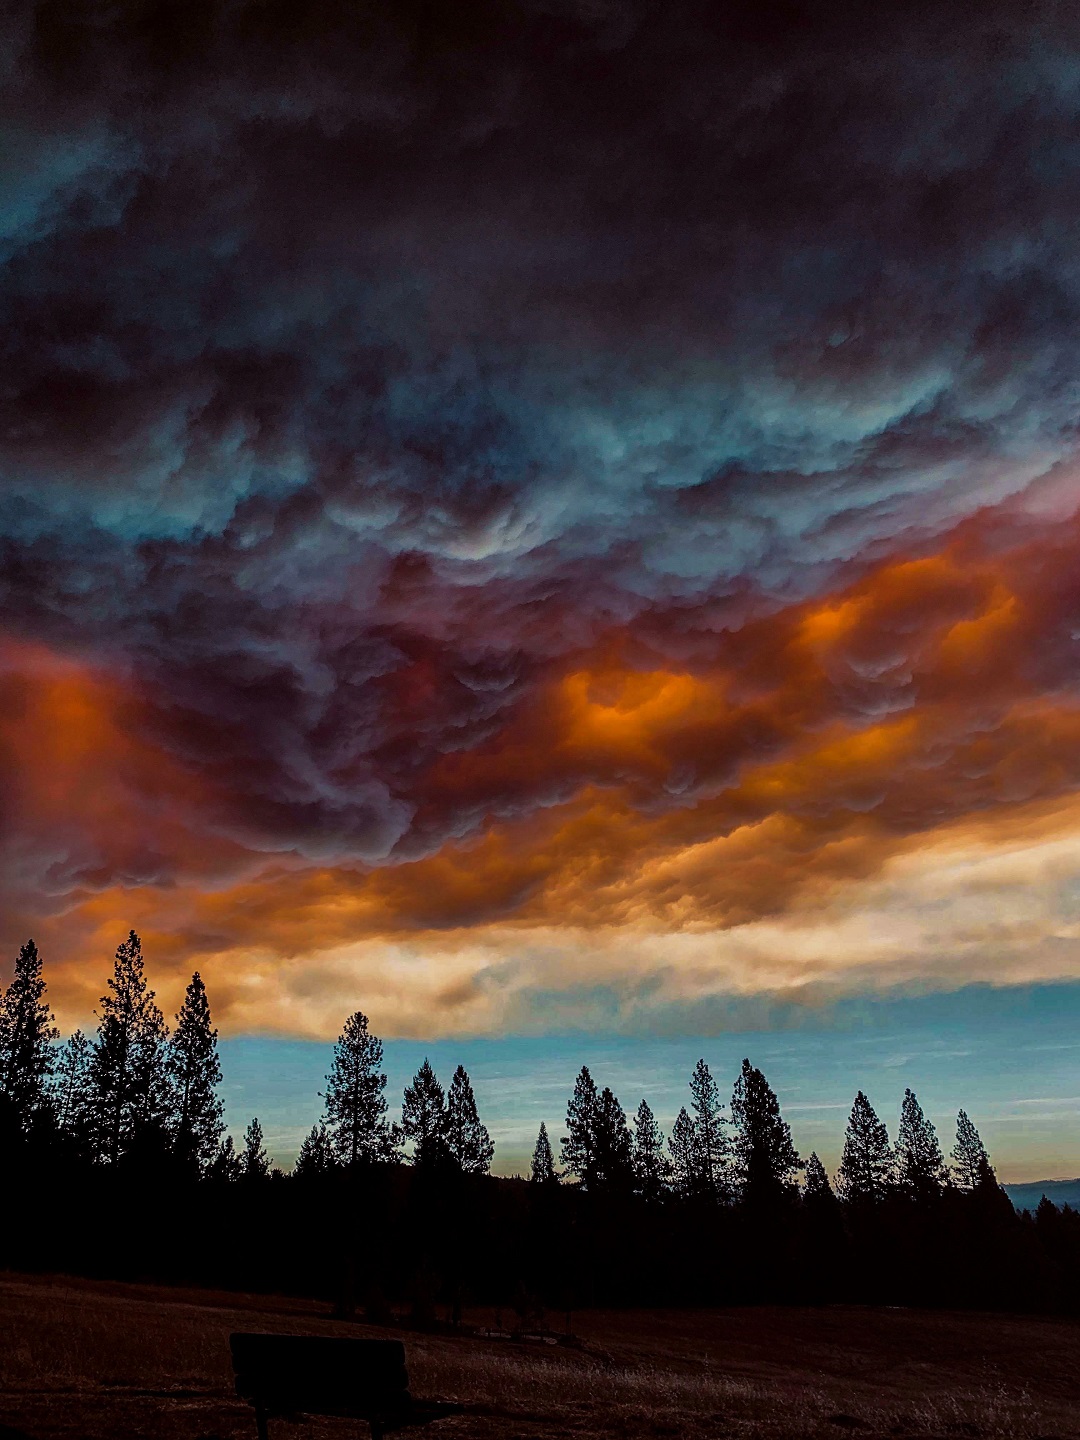 Apocalyptic Sky In Northern California Yesterday Due To Smoke From Nearby Fires